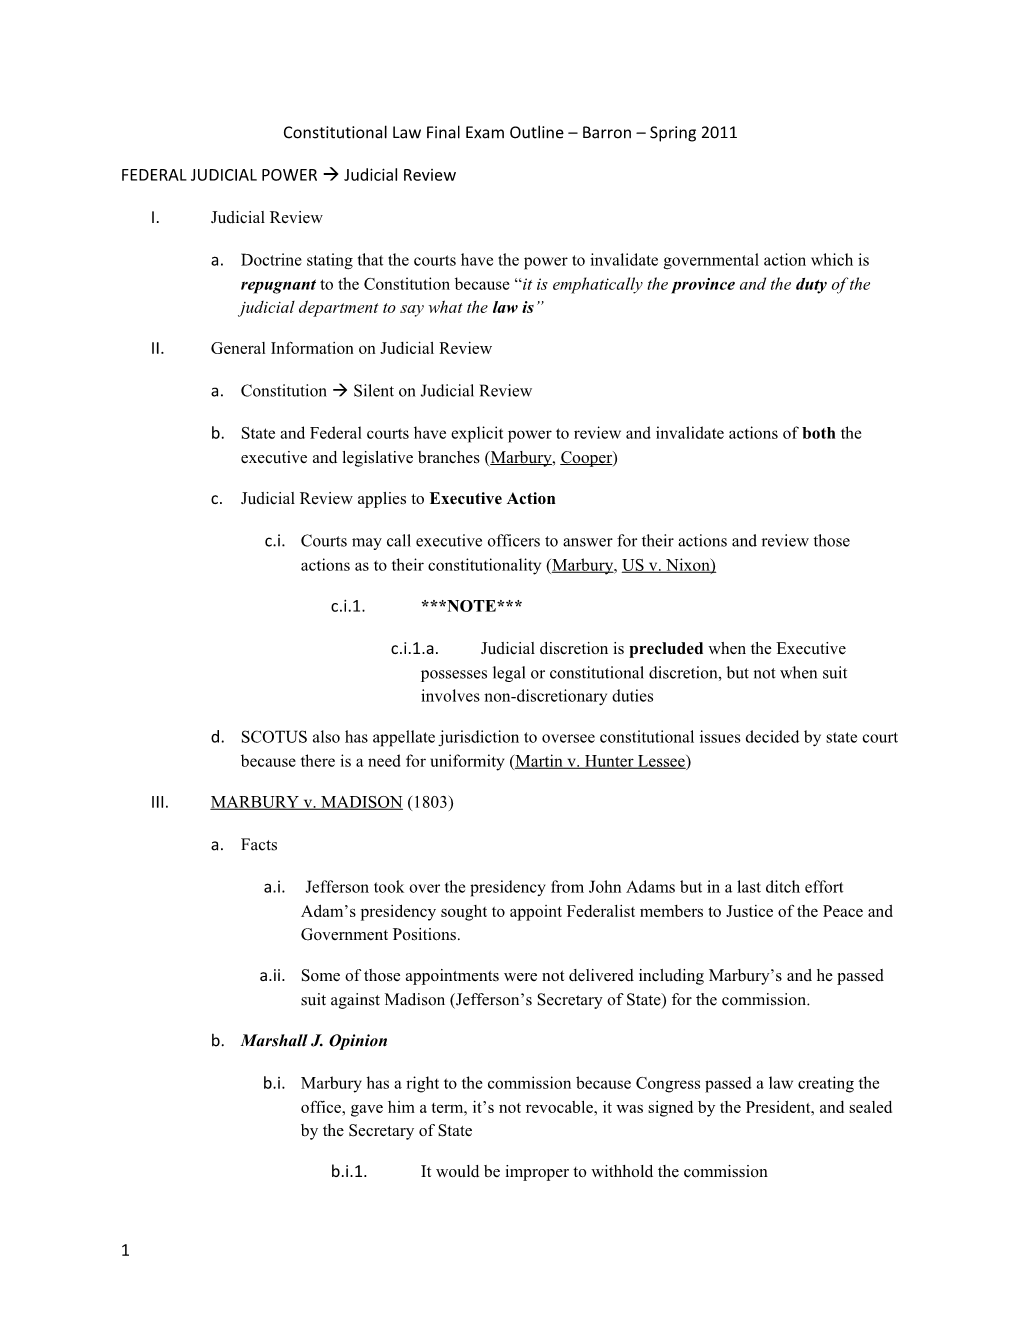 Constitutional Law Final Exam Outline Barron Spring 2011